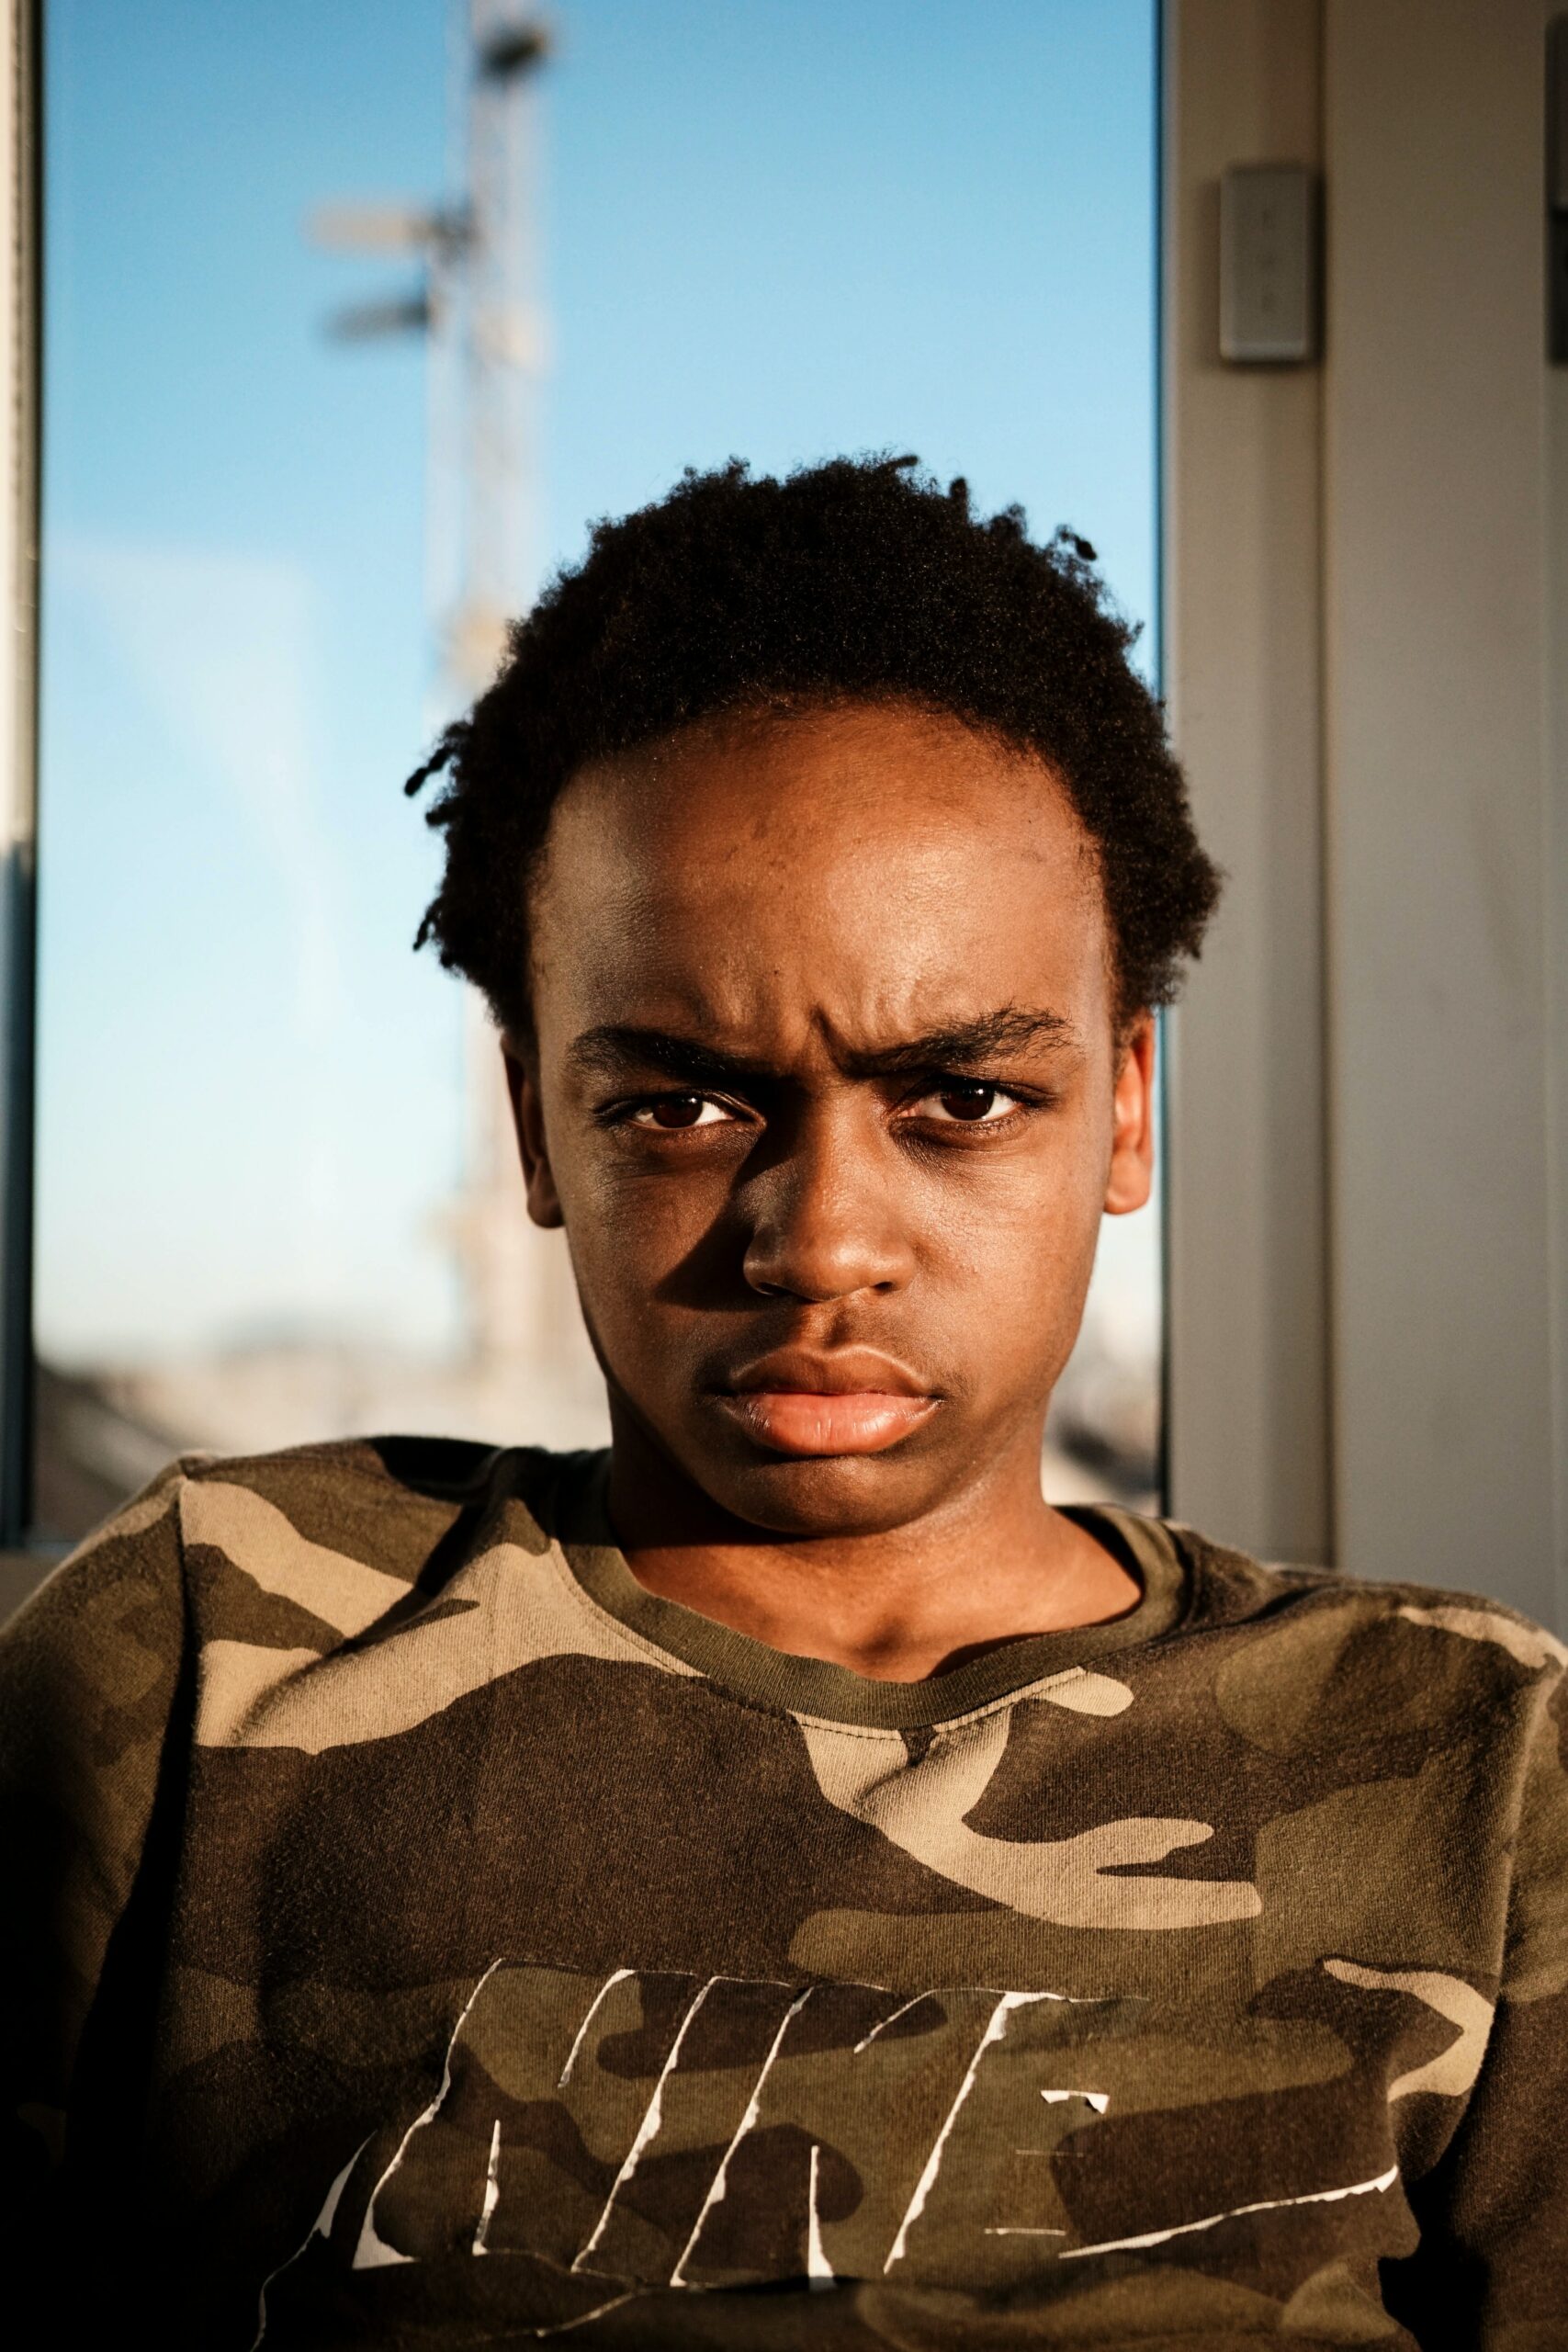 Photo of a young African American child displaying an angry face. Learn to break free from your anger issues with the help of anger management counseling in Macon, GA.